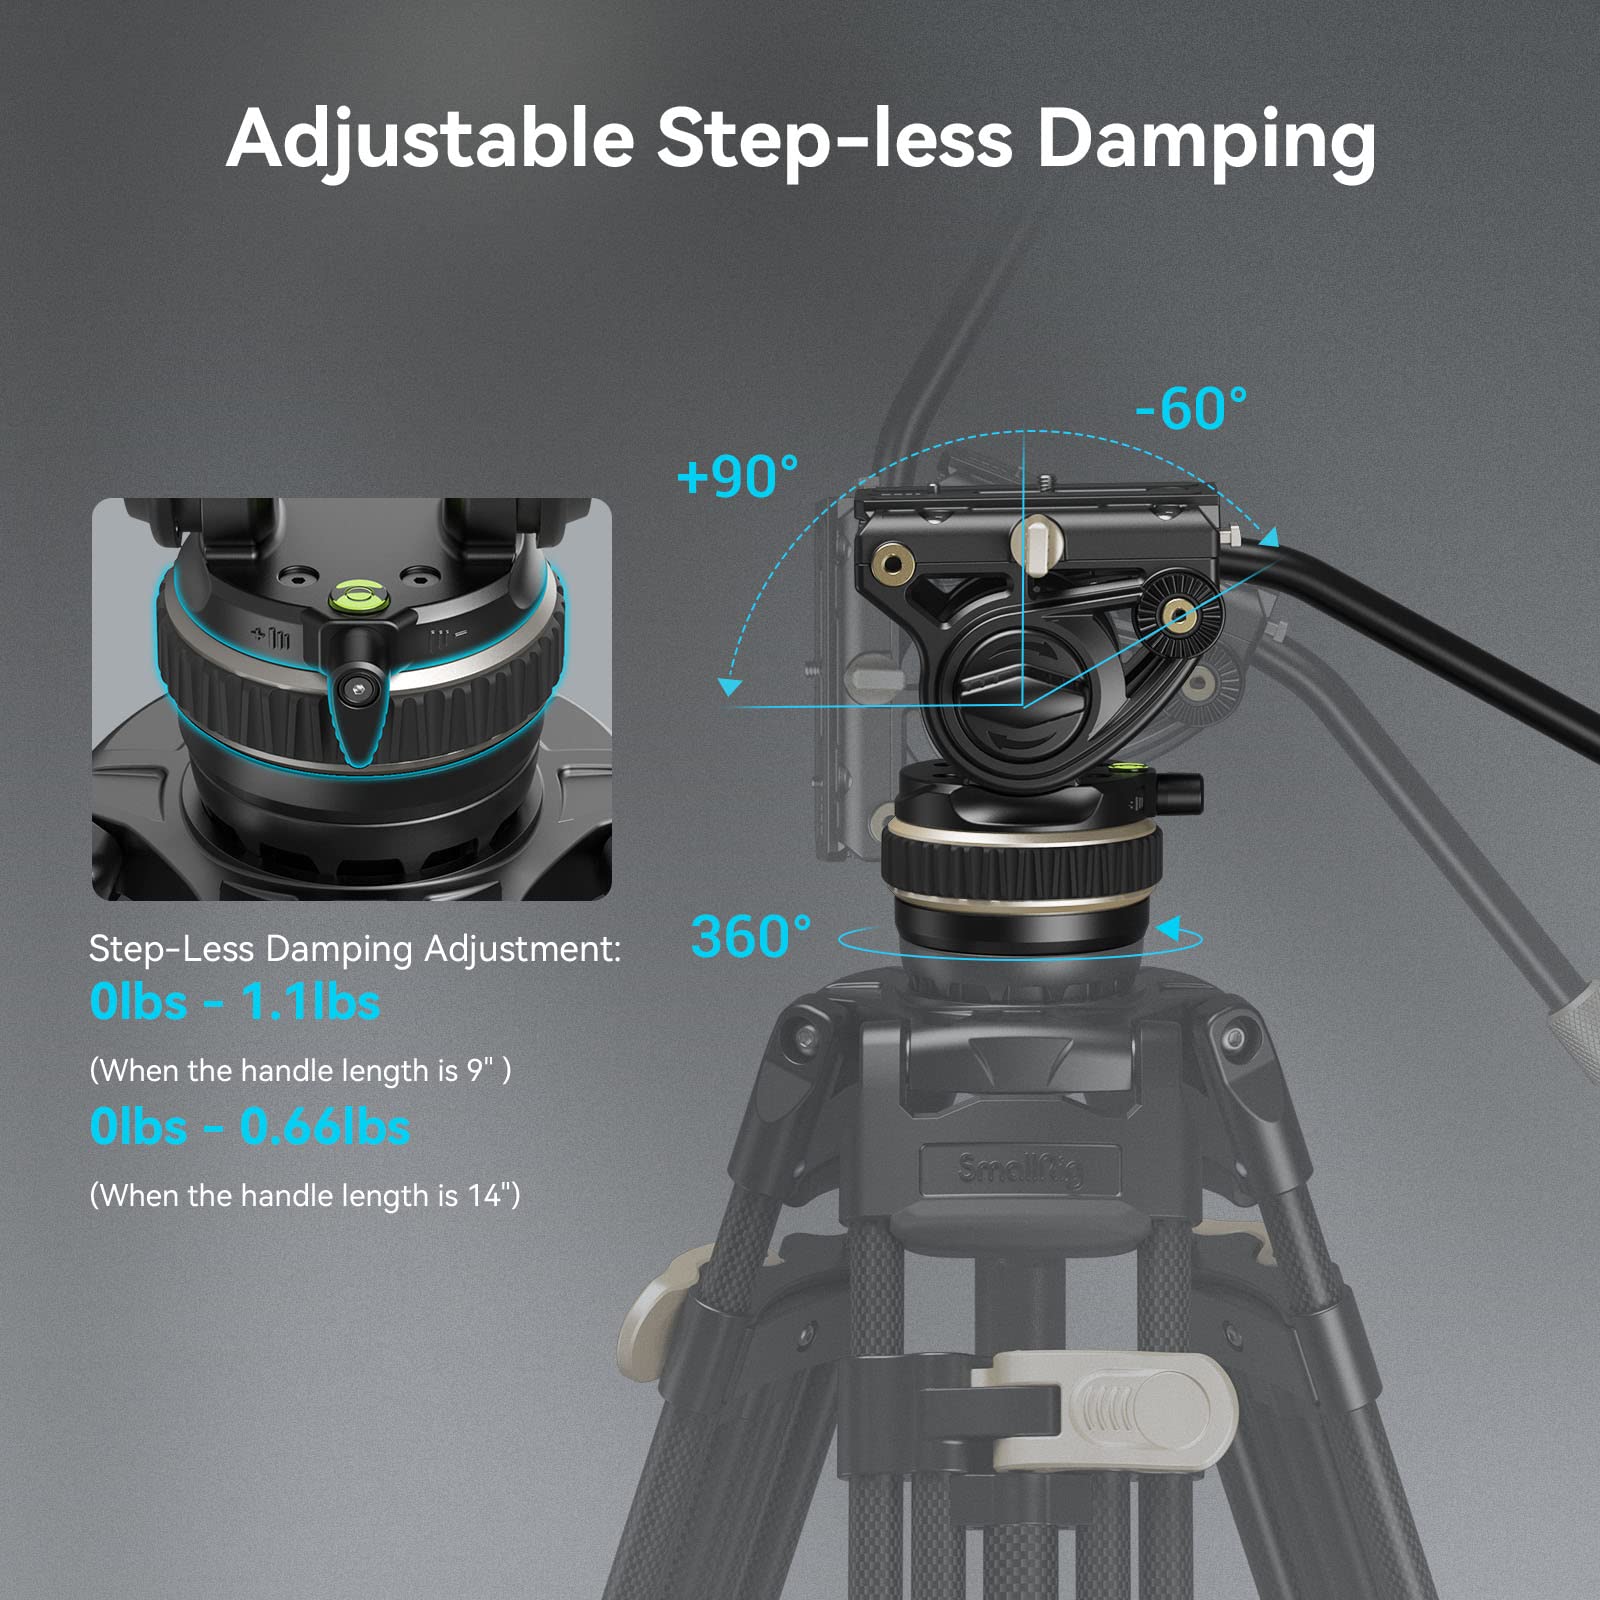 SmallRig DH10 Heavy Duty Tripod Fluid Video Head with Flat Base and Adjustable Handle, Quick Release Plate for Manfrotto Video Head Mount Plate, Load up to 22Ibs, for Video Cameras, DSLR Cameras 4165